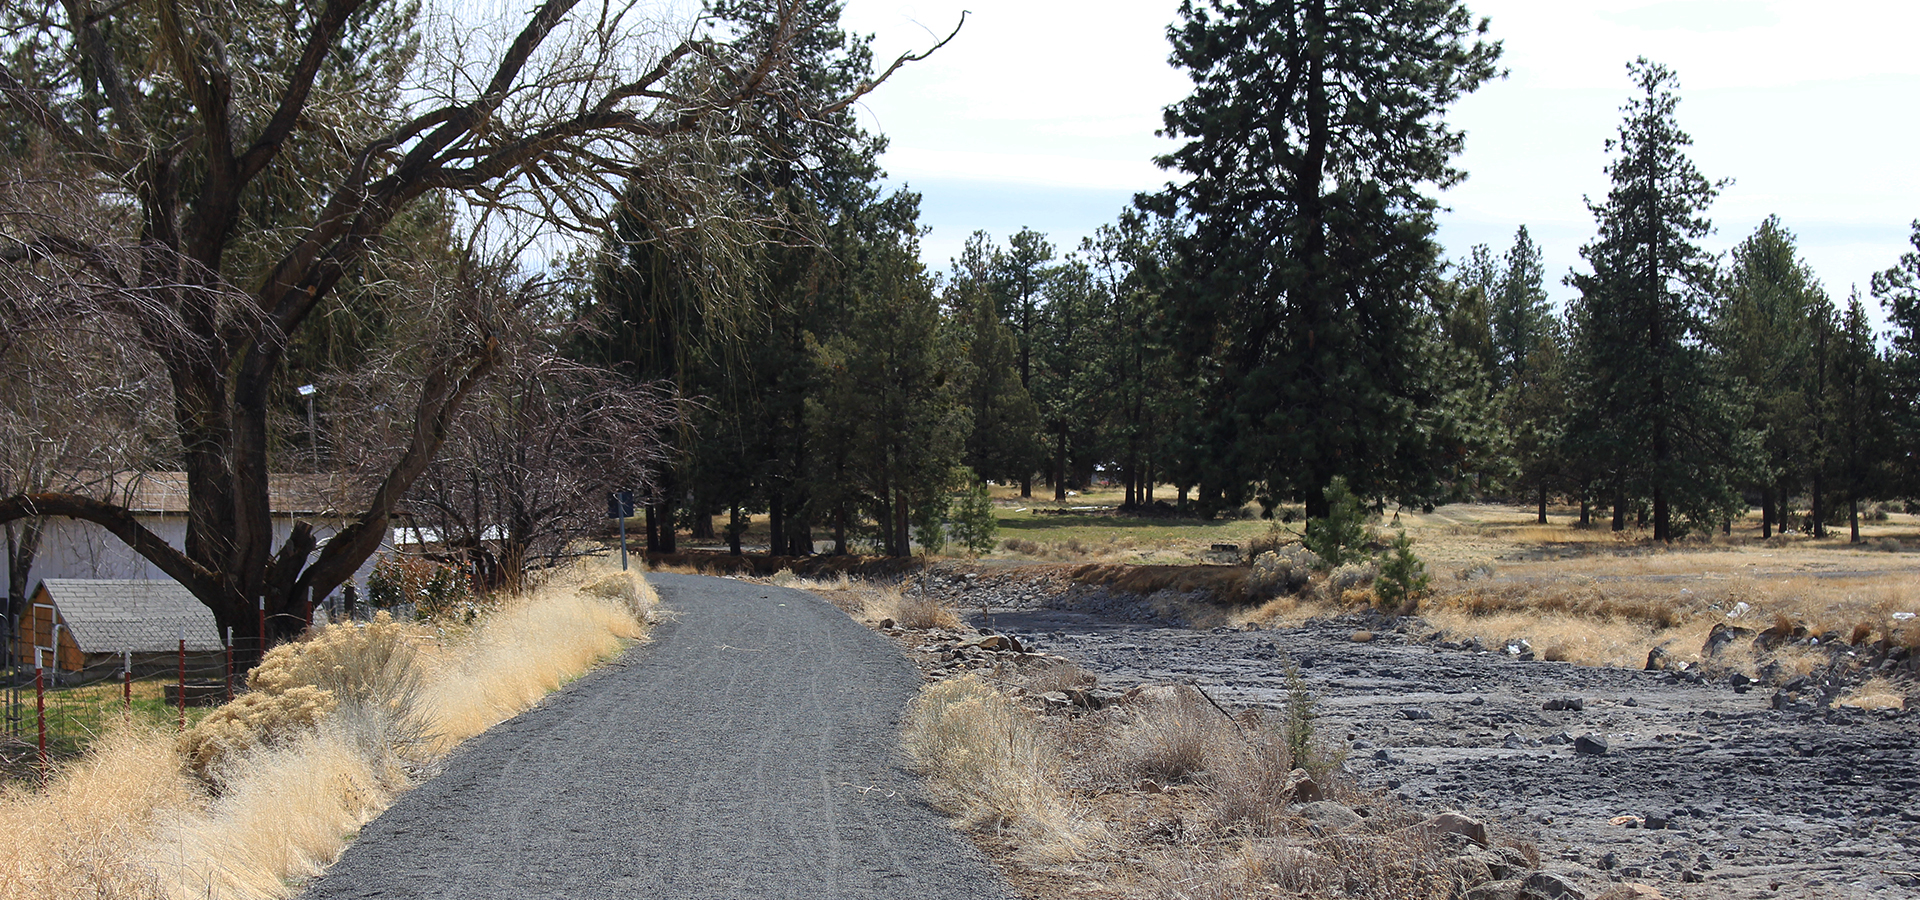 Image of the Central Oregon Historic Canal Trail in Bend, Oregon.